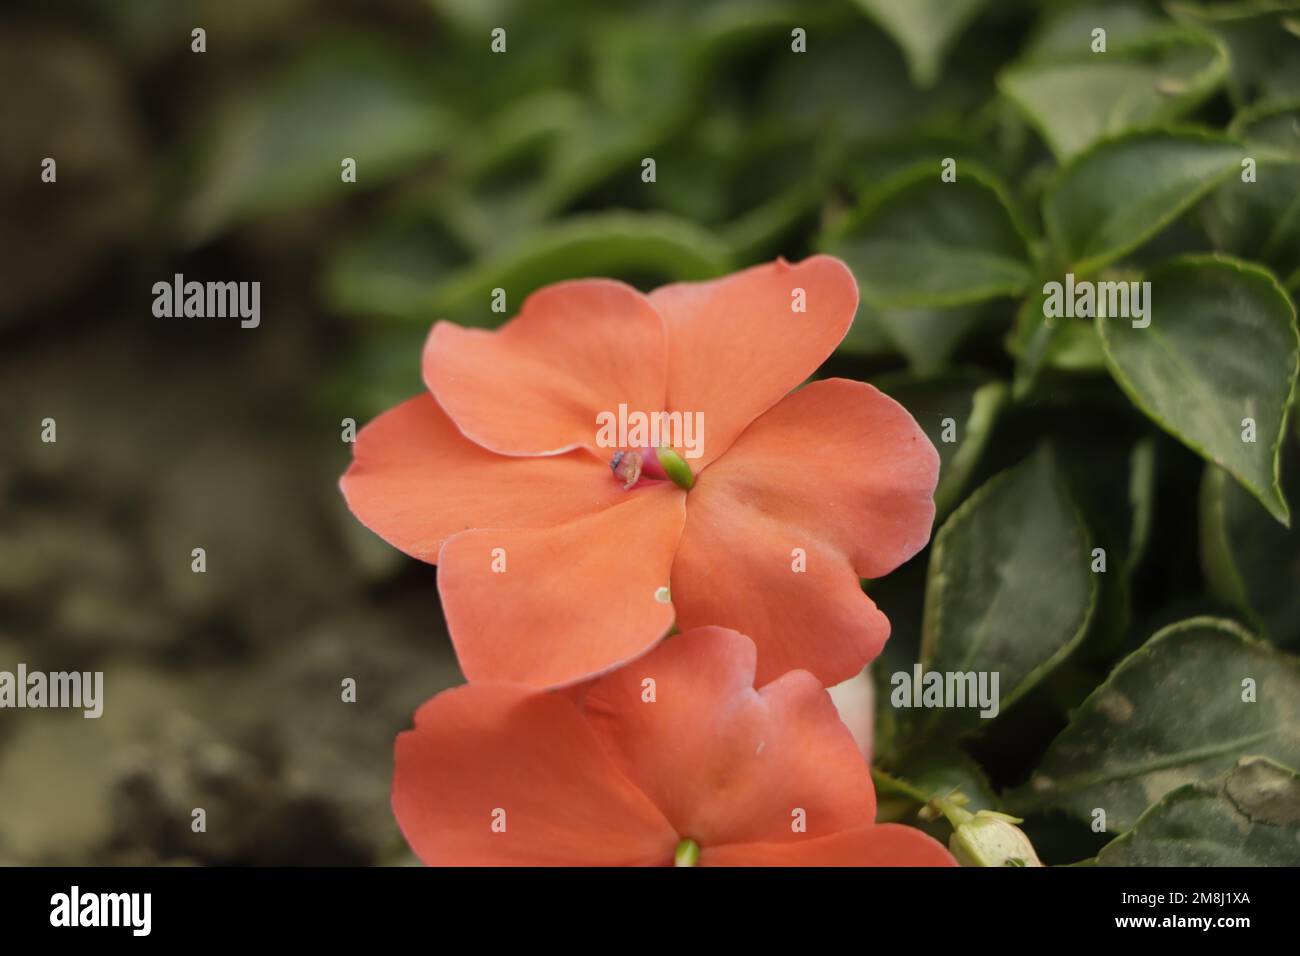 Blossoms in pink, orange, white or red. Summer flowers Impatiens walleriana. Stock Photo